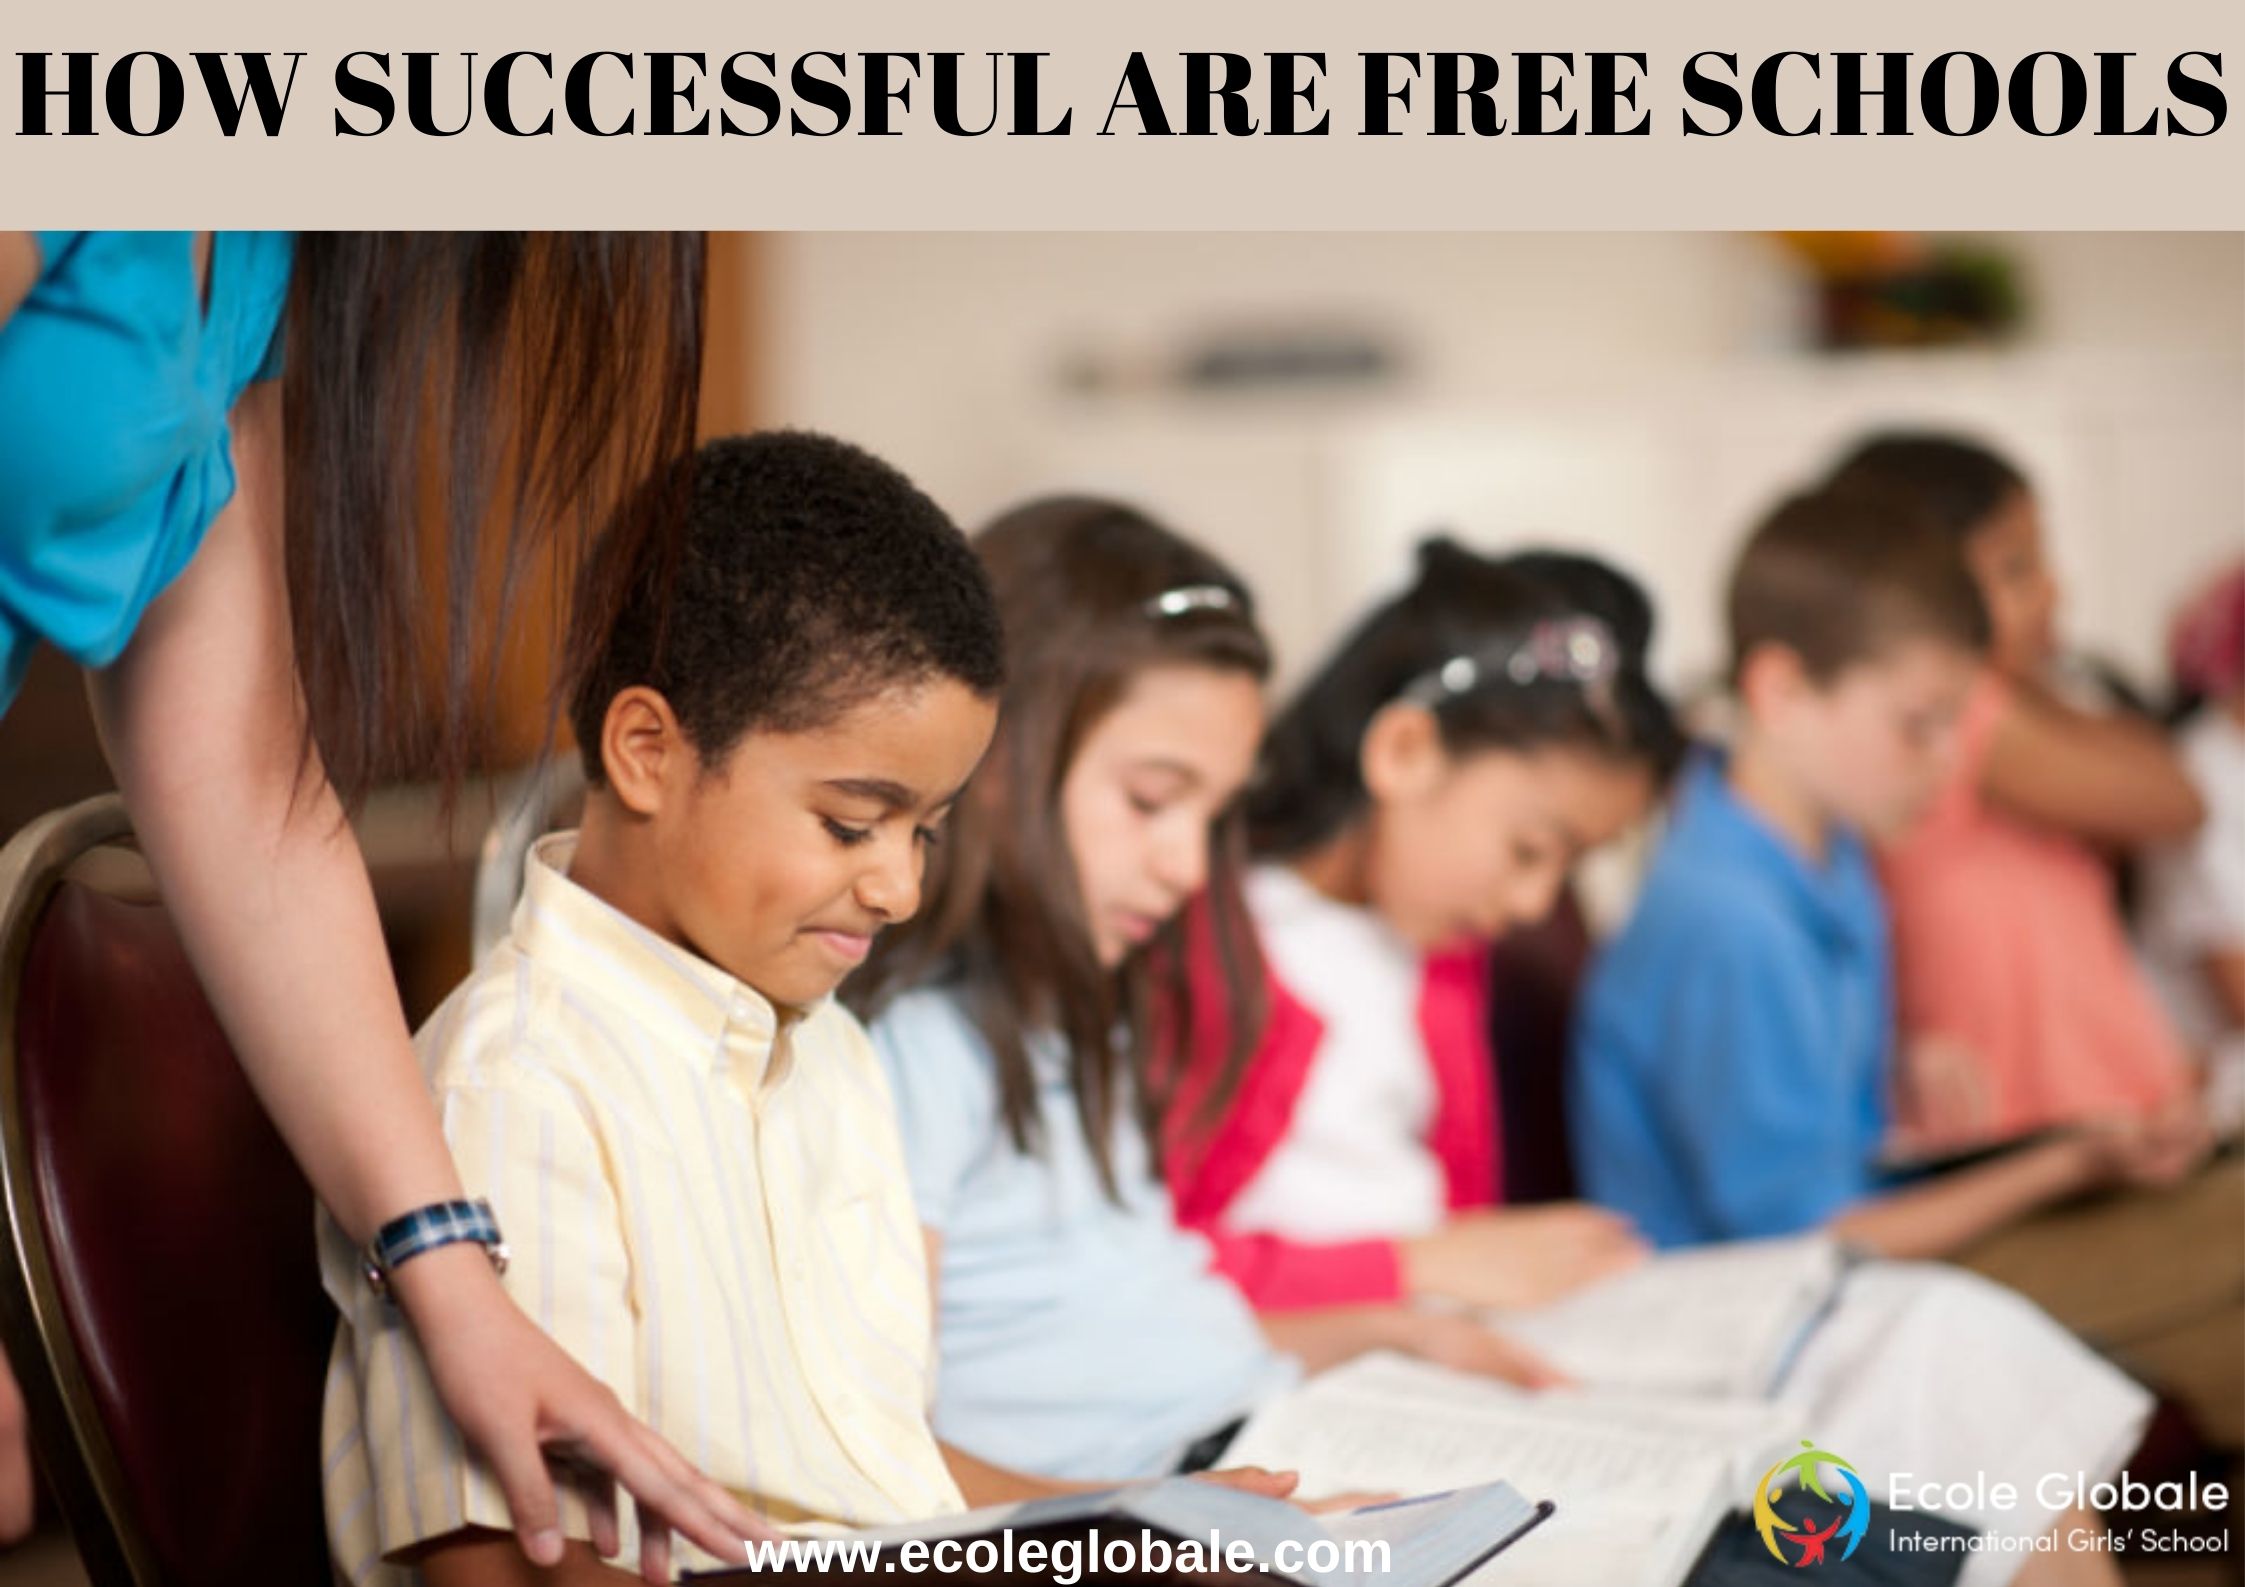 HOW SUCCESSFUL ARE FREE SCHOOLS